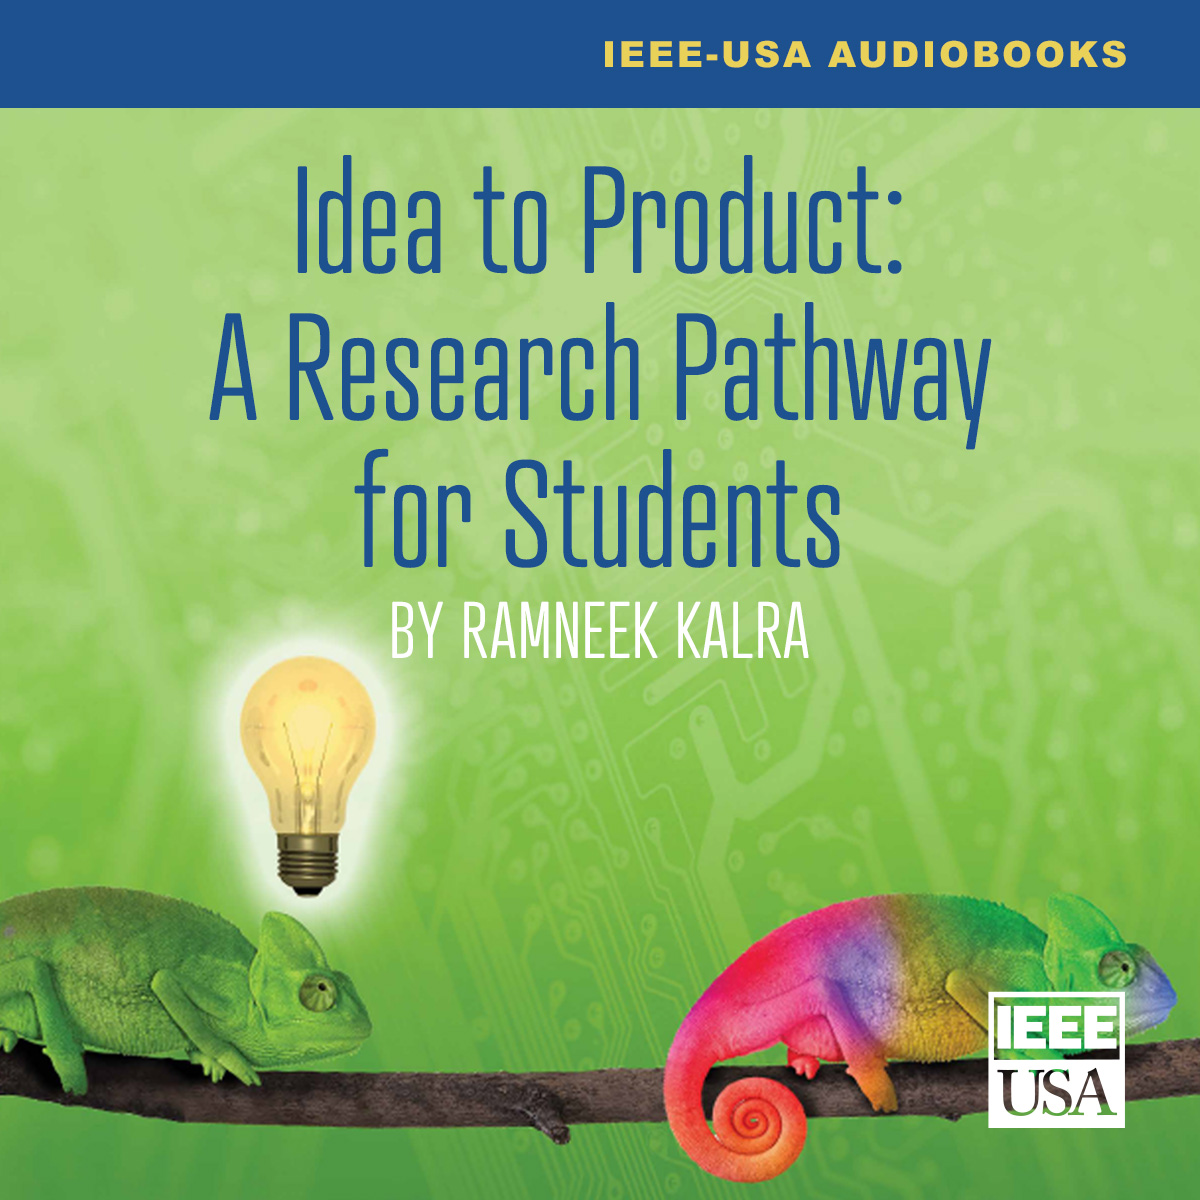 Idea to Product--A Research Pathway for Students